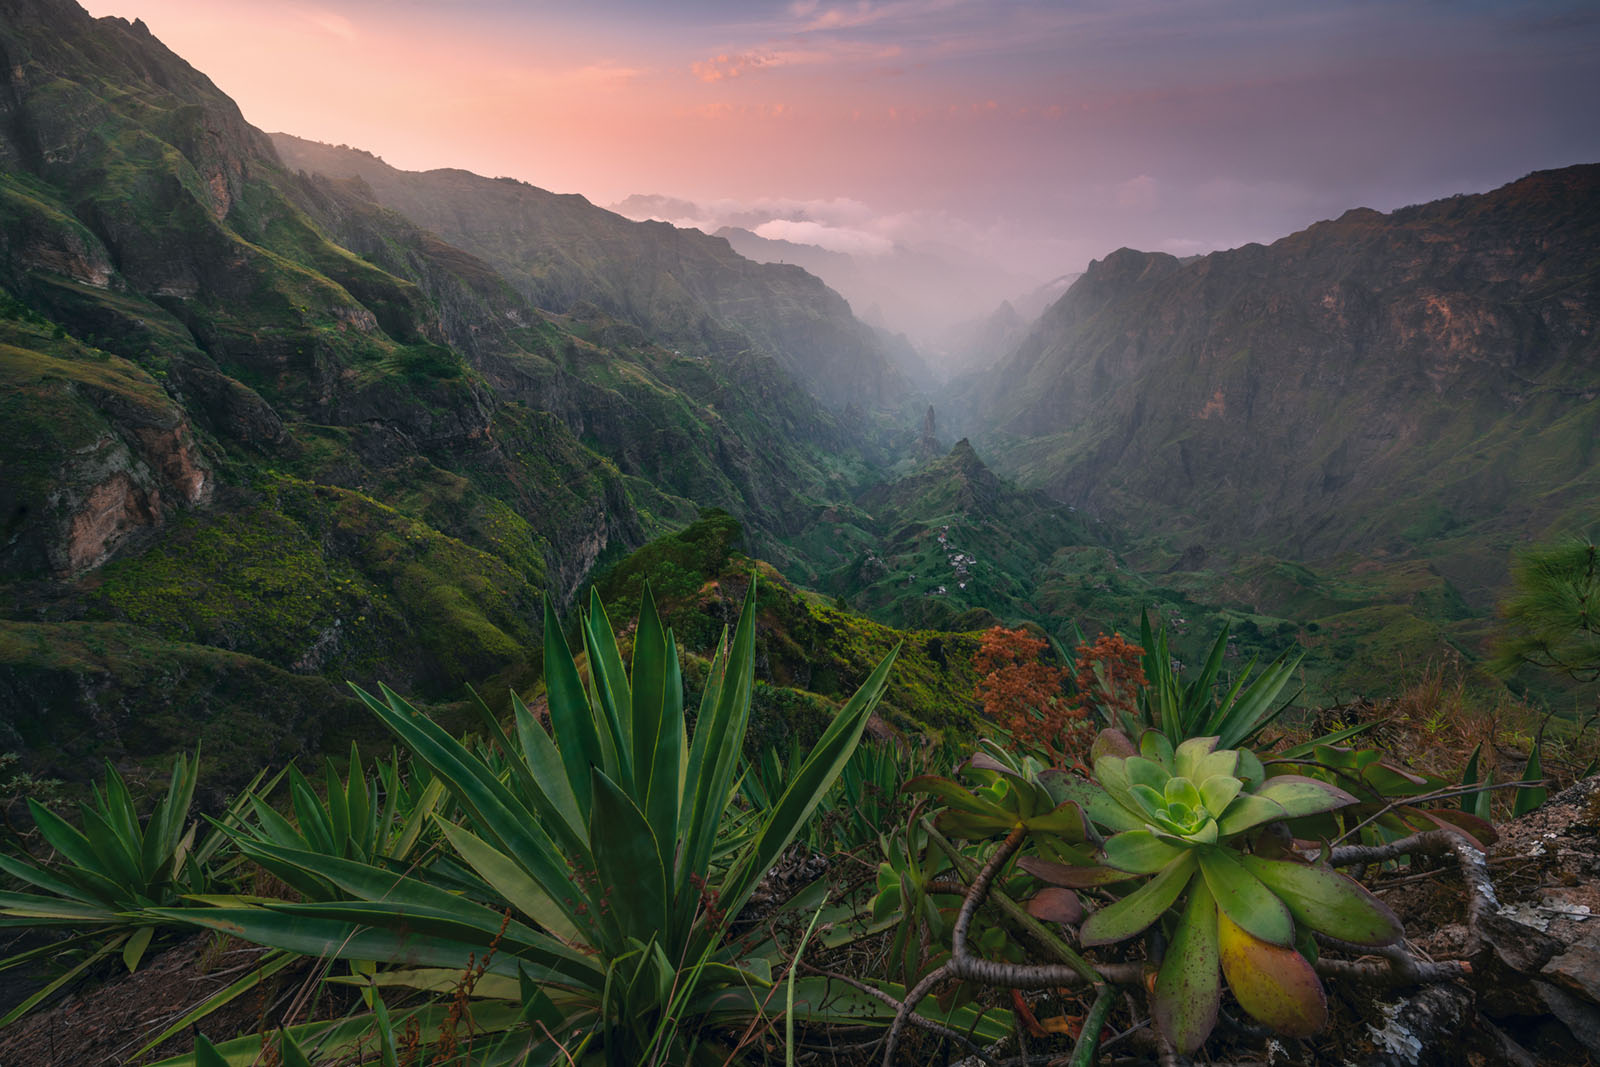 Buy image - The picturesque green Xoxo Valley on Santo Antao - Cape Verde in the soft evening light with lush vegetation